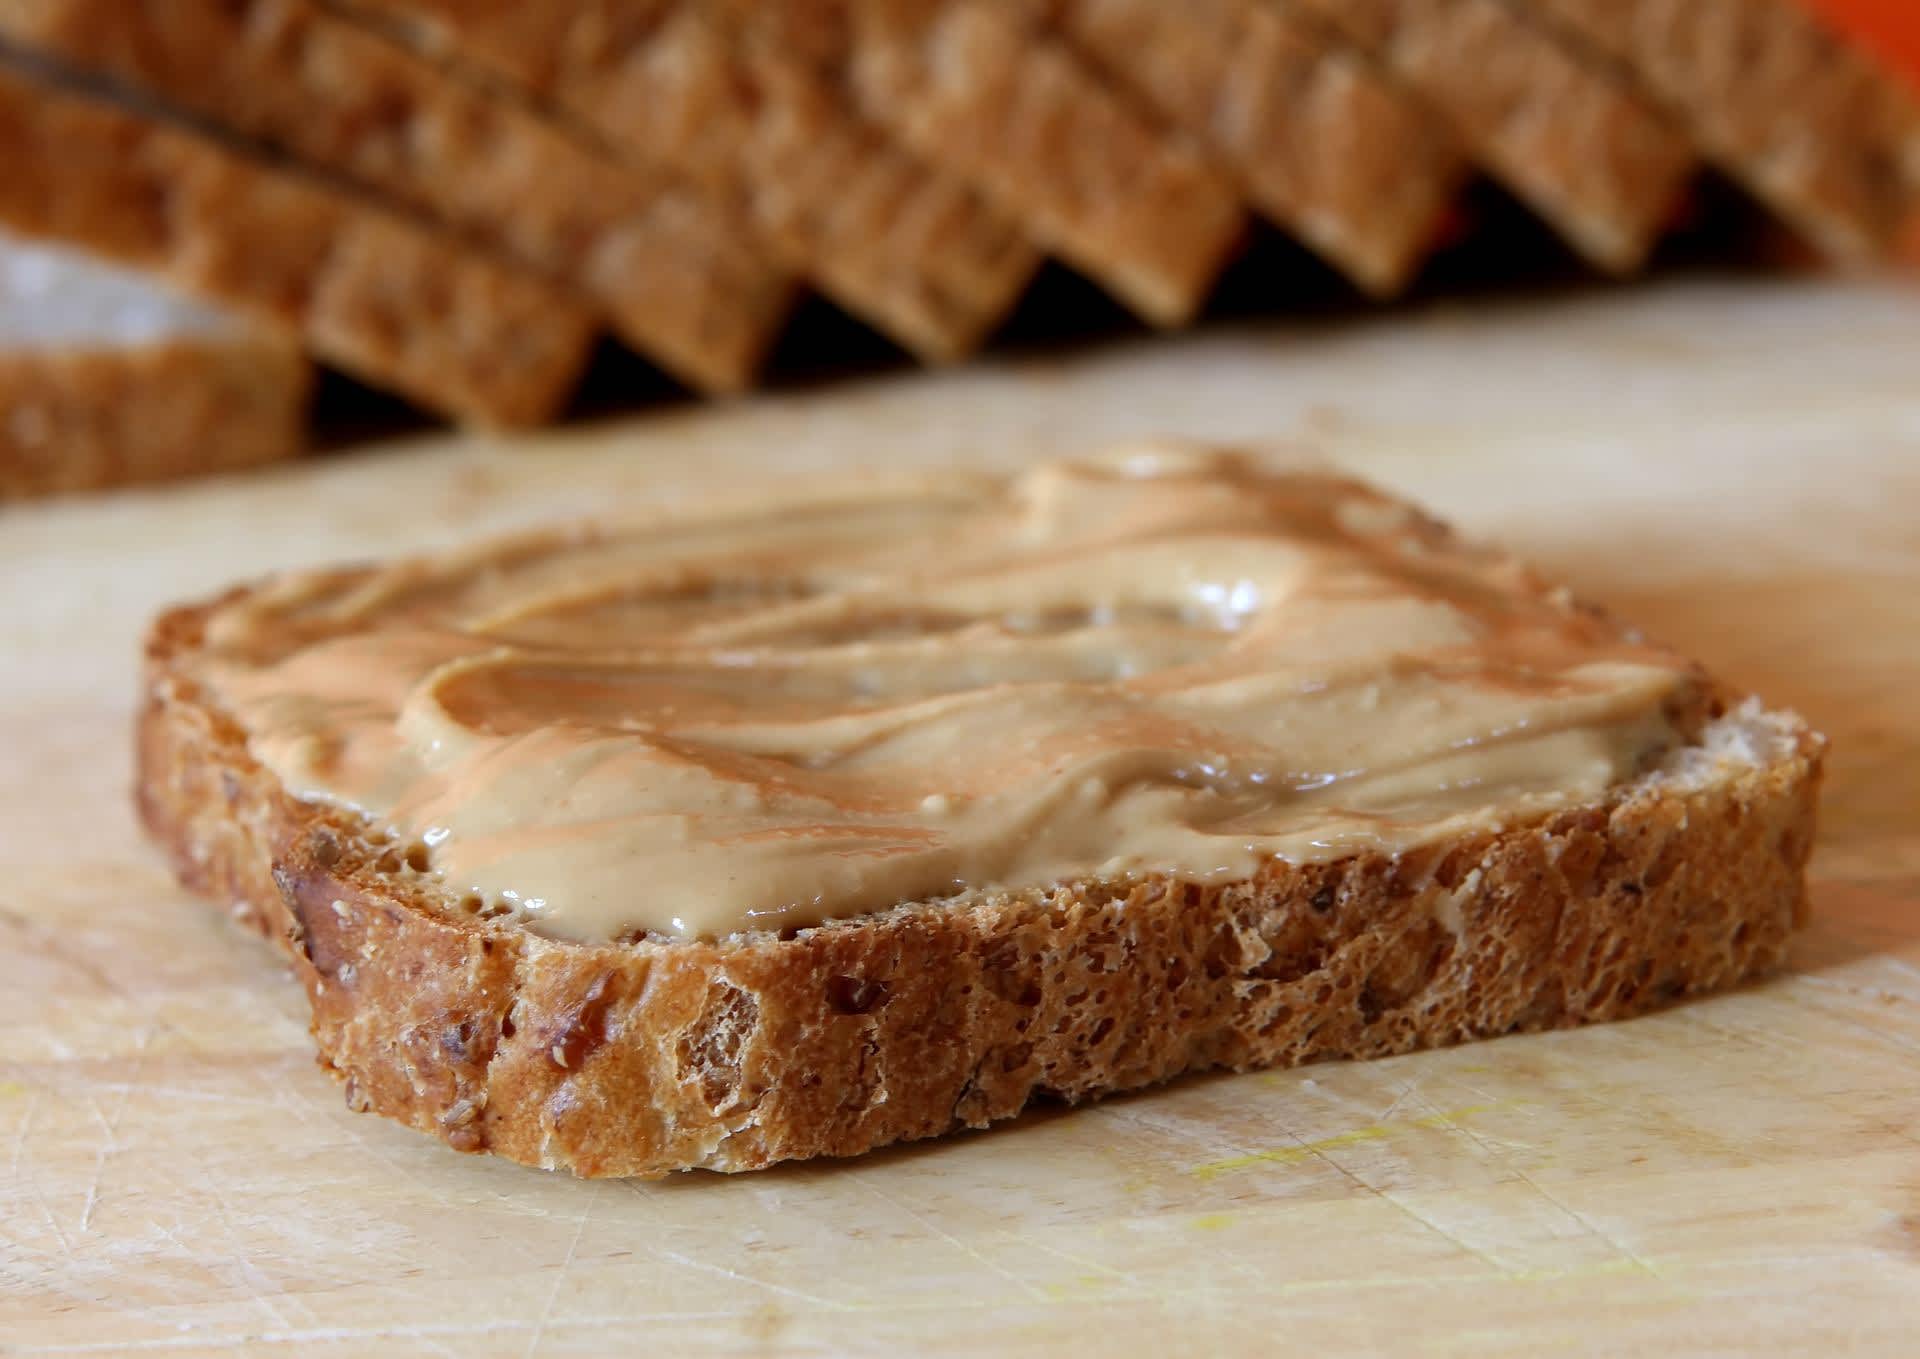 These are the seven best nut butter spreads.